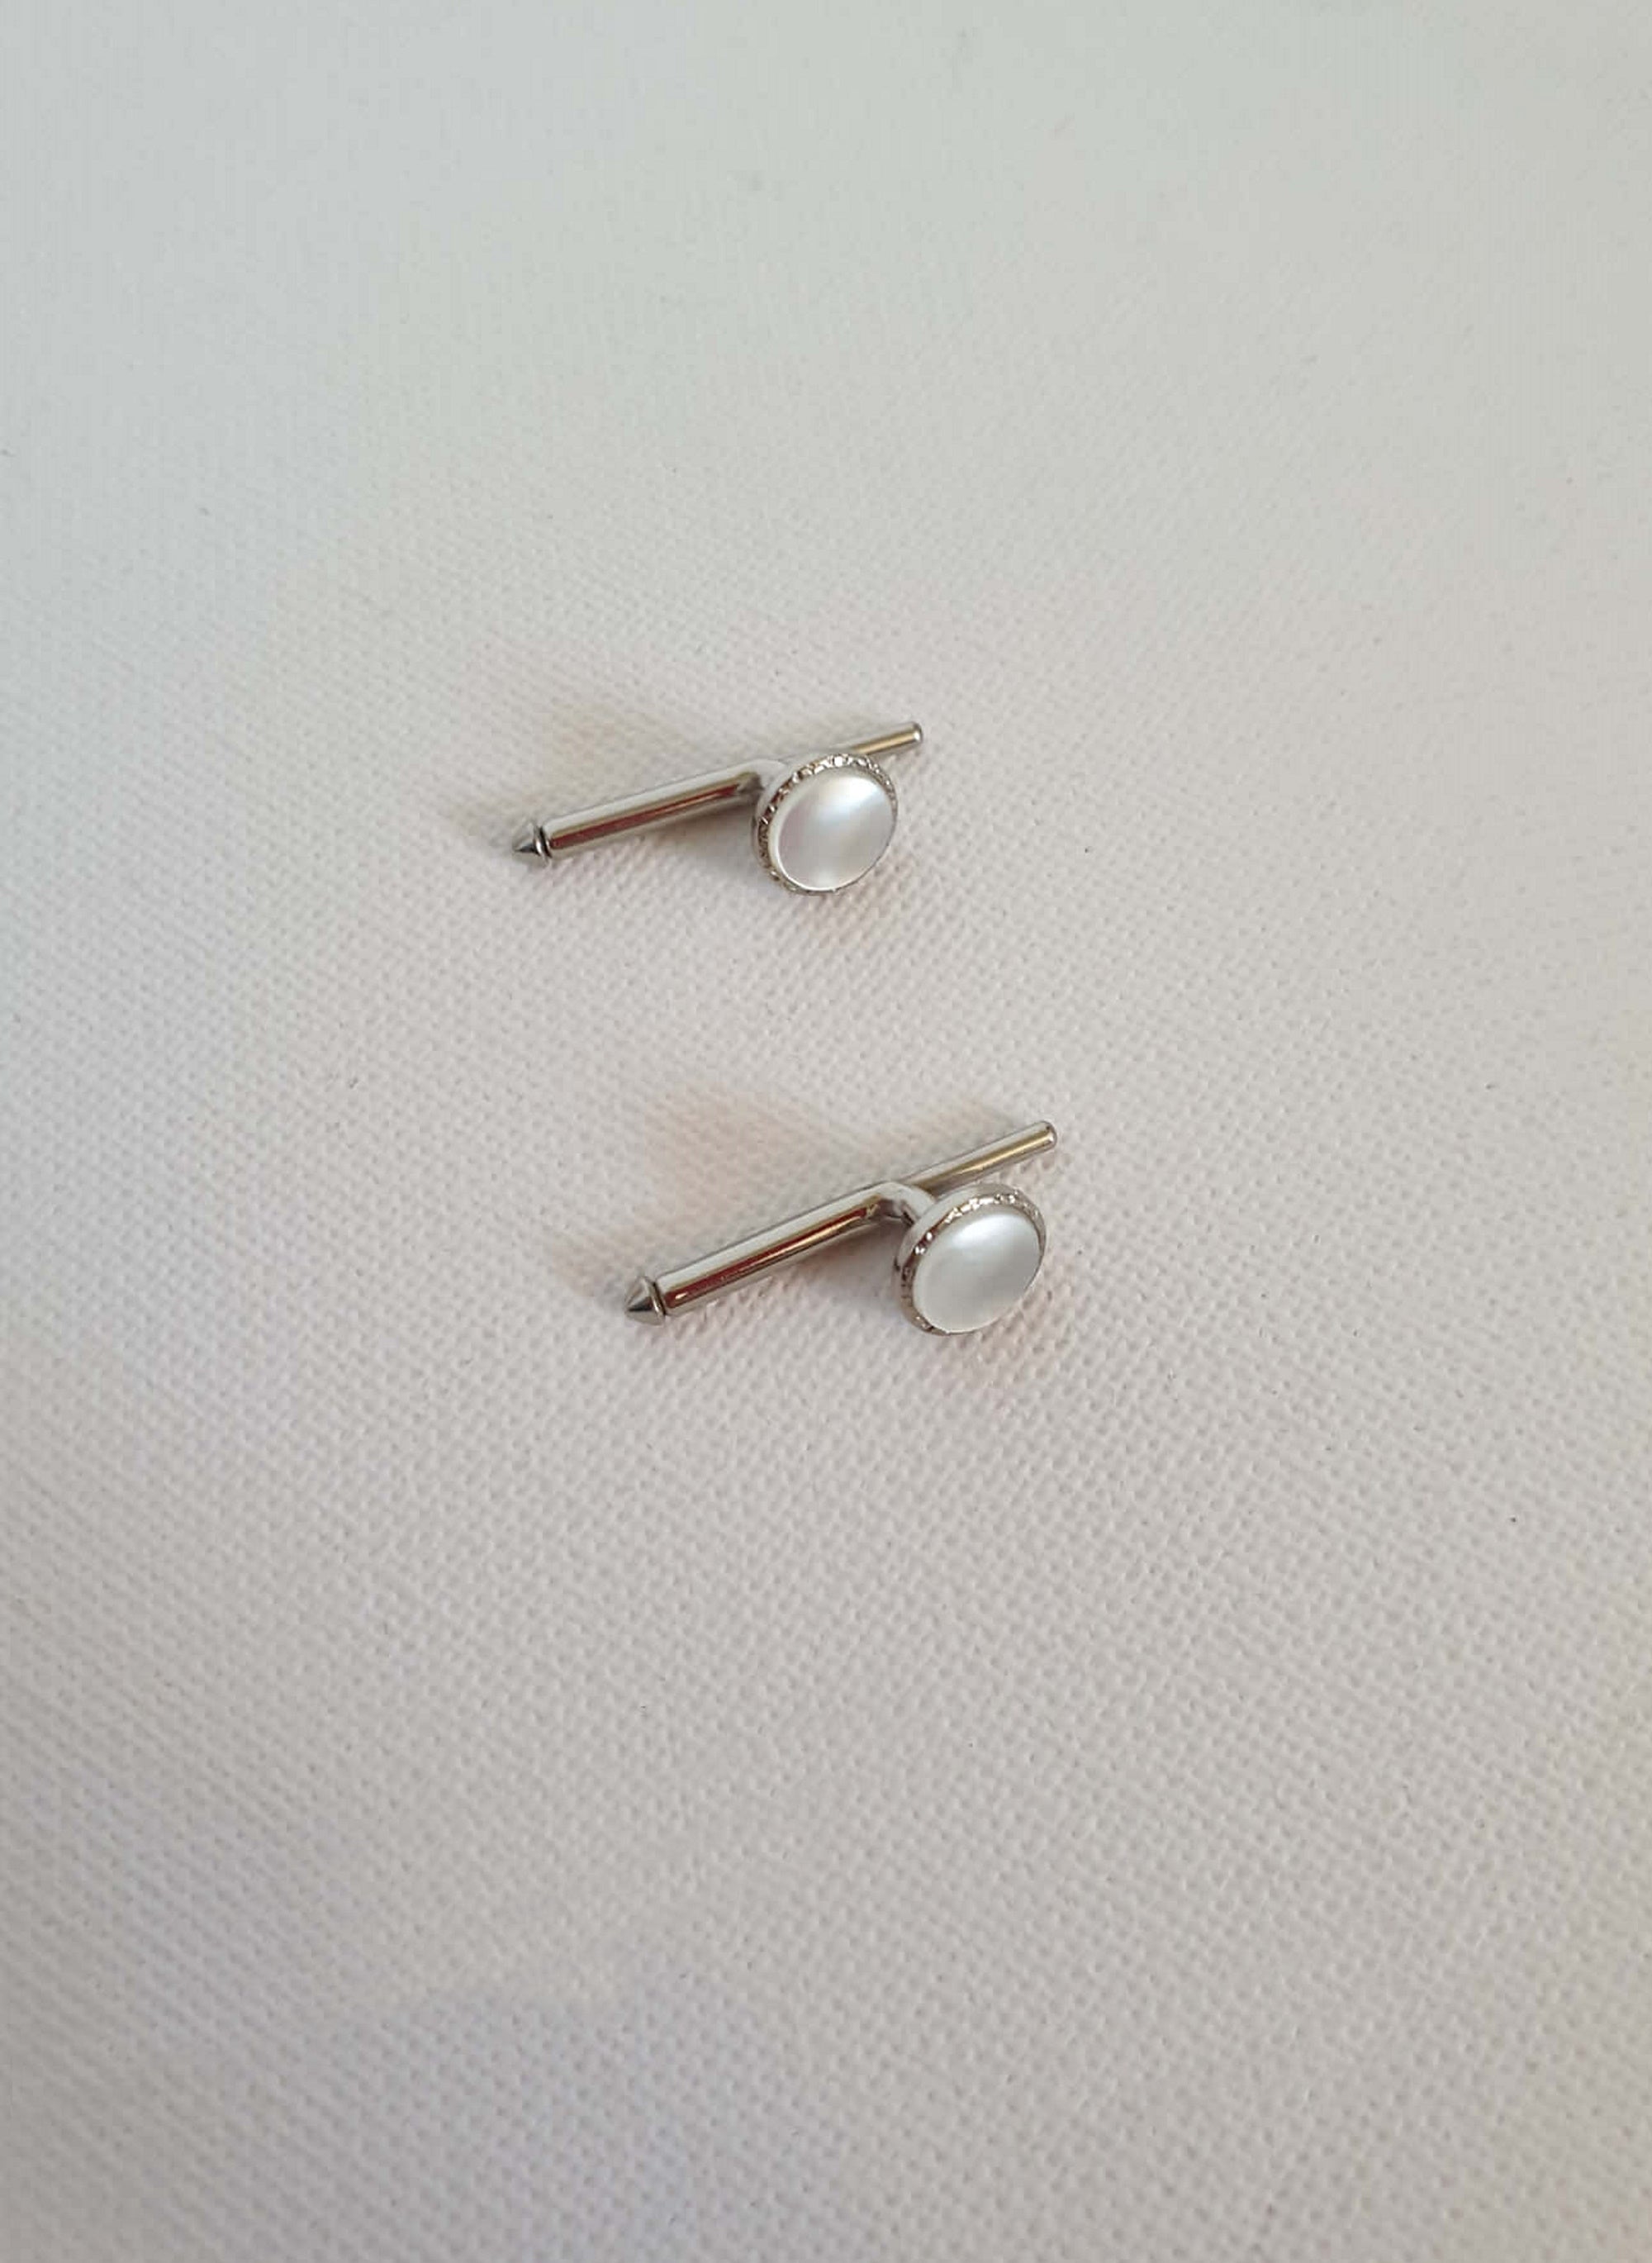 vintage two silver tone pearl shirt studs